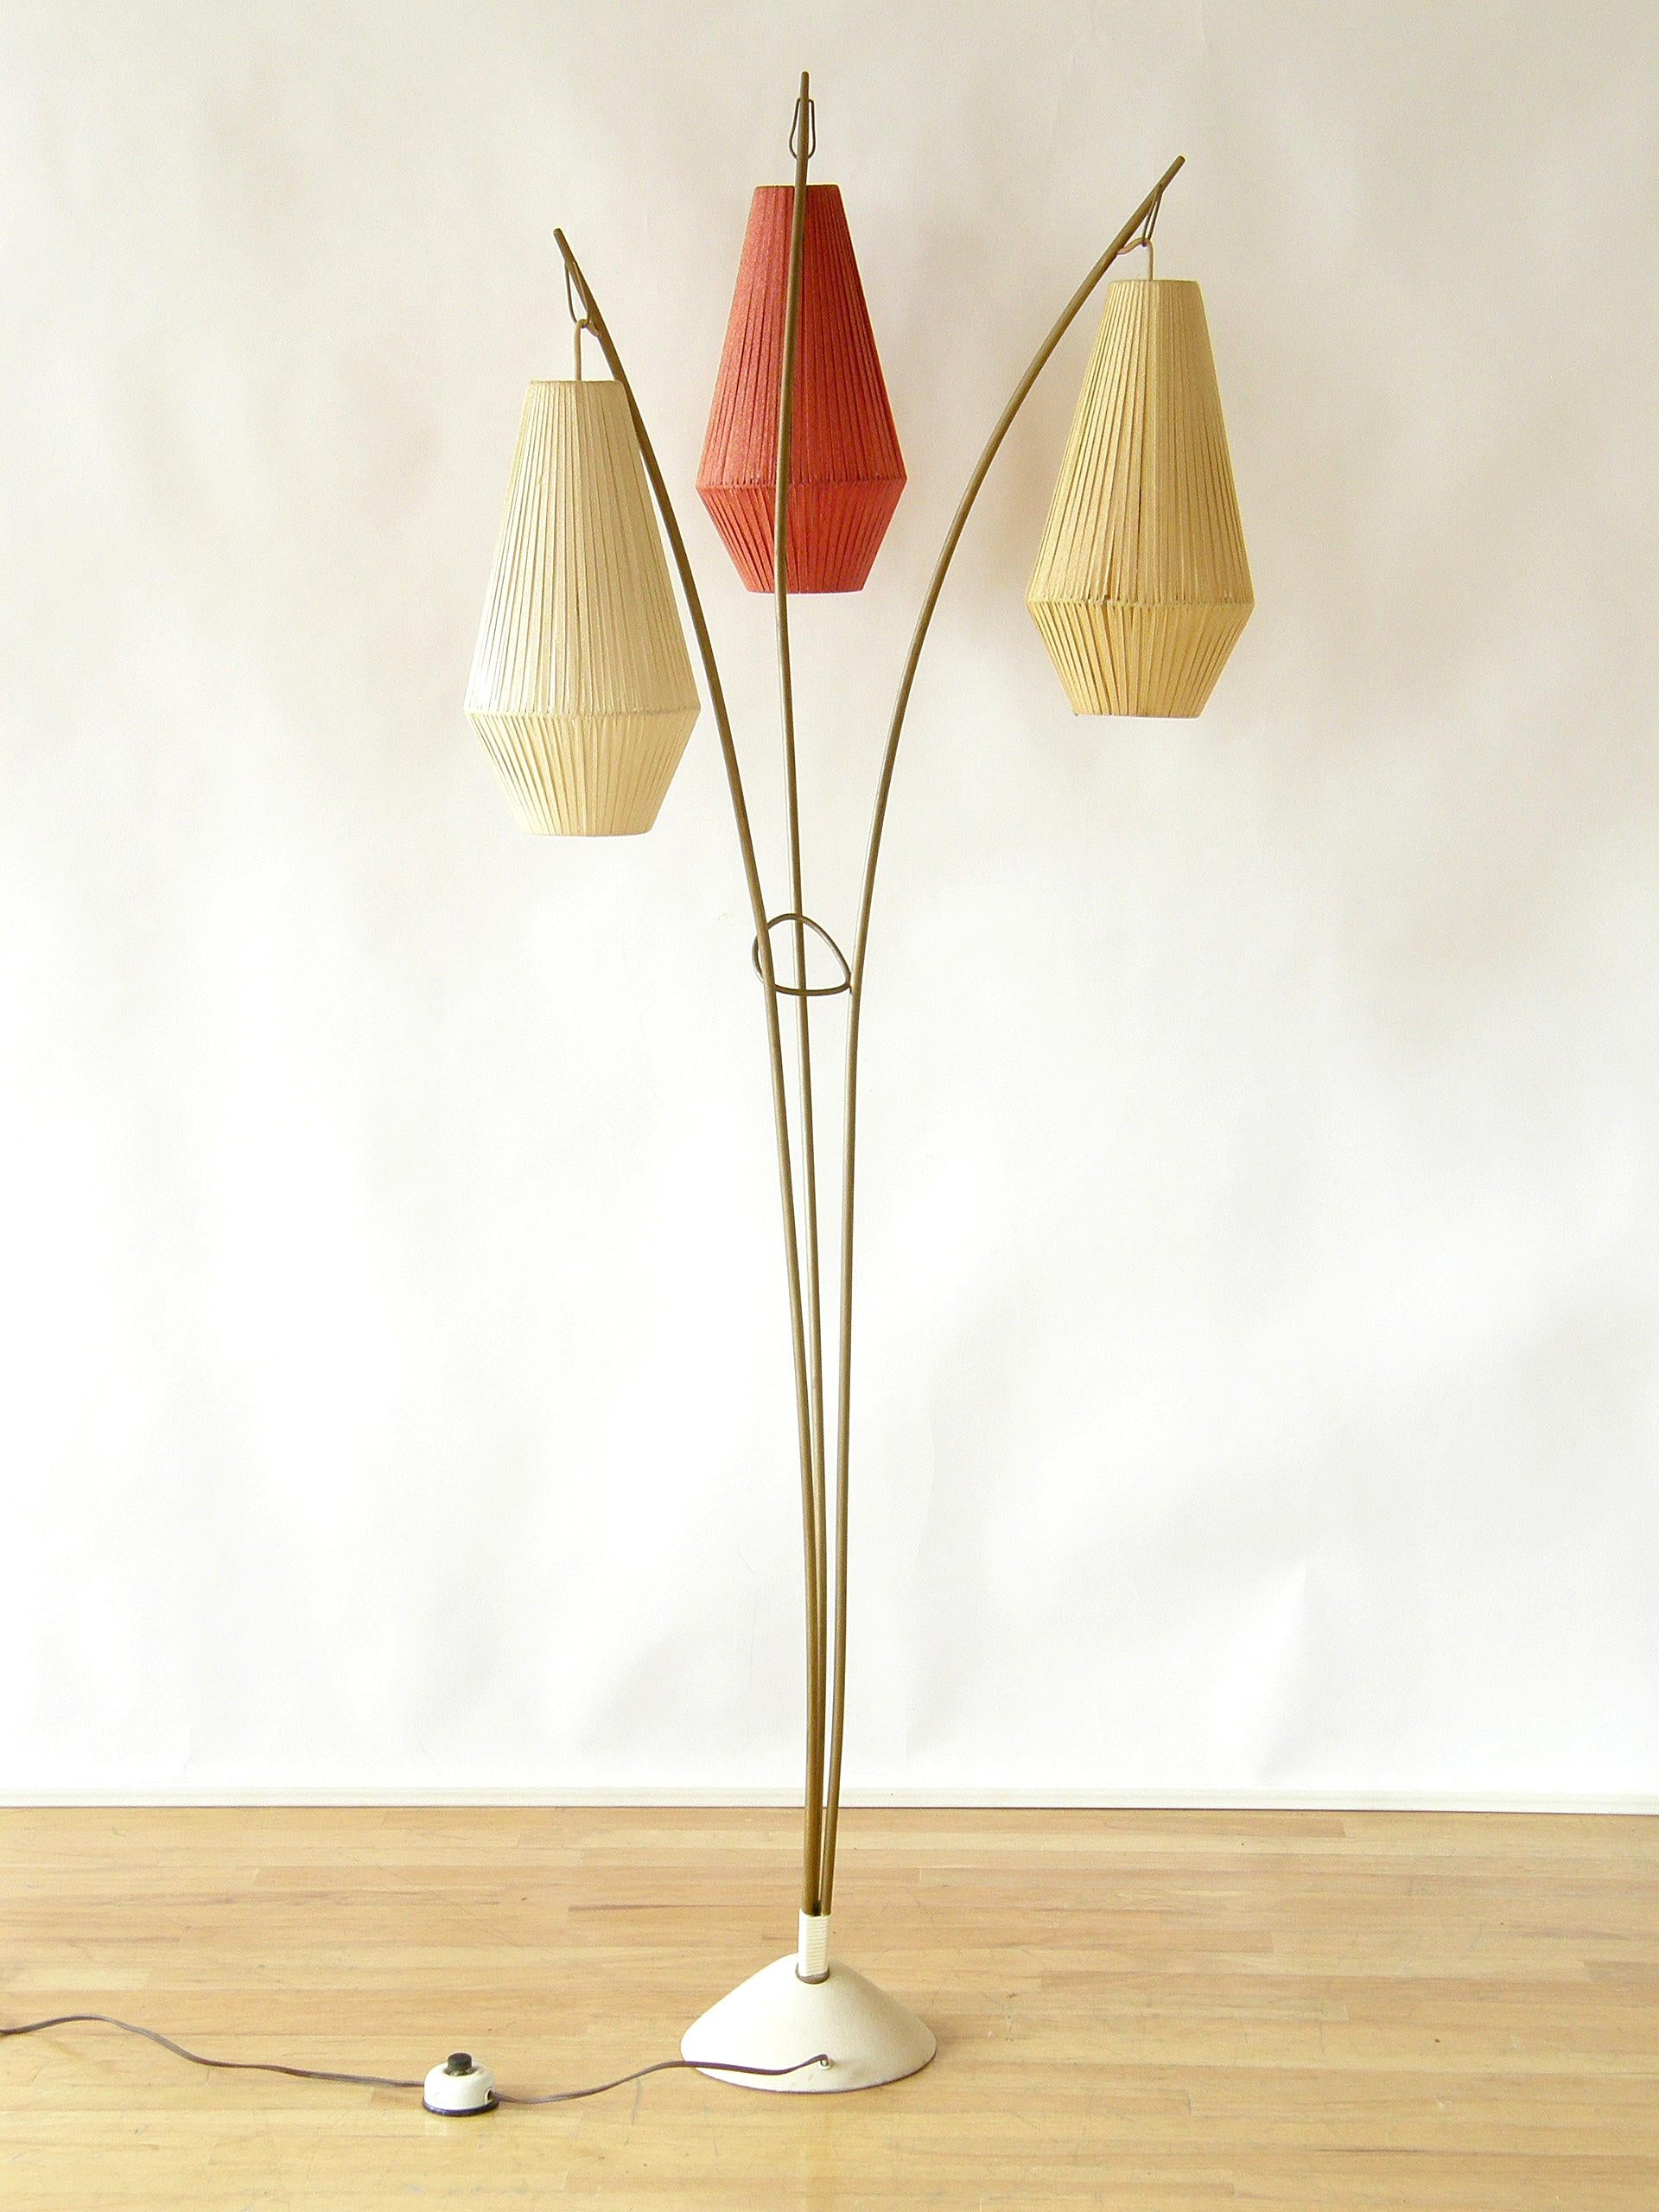 Mid-20th Century Floor Lamp with Three Curved Arms and Lantern Shaped Woven Ribbon Shades